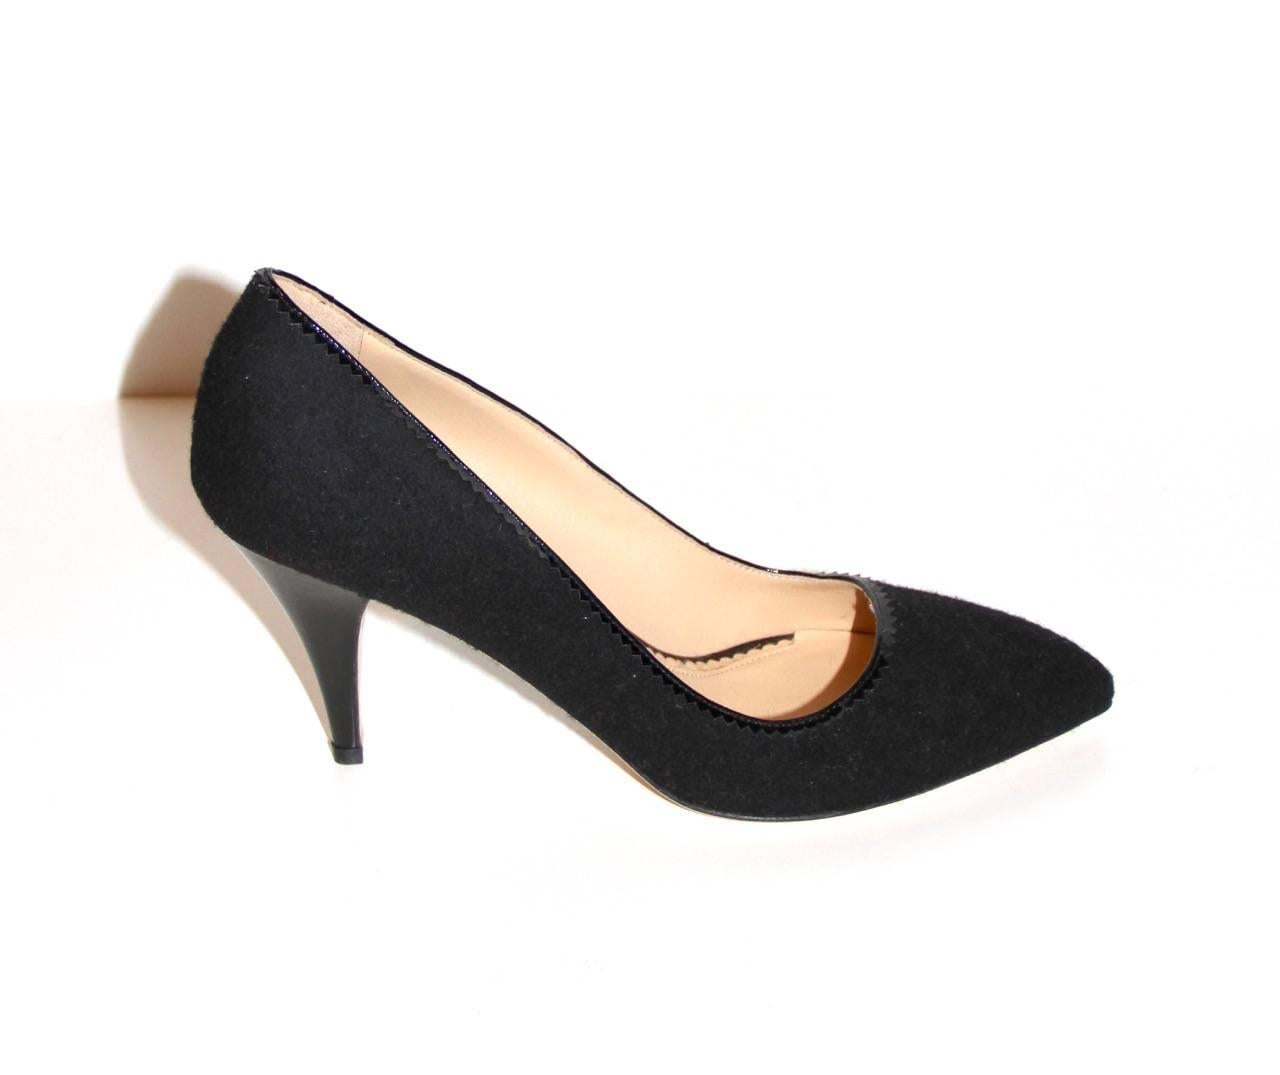 Gorgeous point toe pumps. Made in Italy 

Collection: Current
Fabric: Flannel
Color: Black
Size: IT 41
Heels: 8.5 cm
Condition: New

All items sold by La Bourse du Luxe are subject to a strict quality control before being looked after (if necessary)